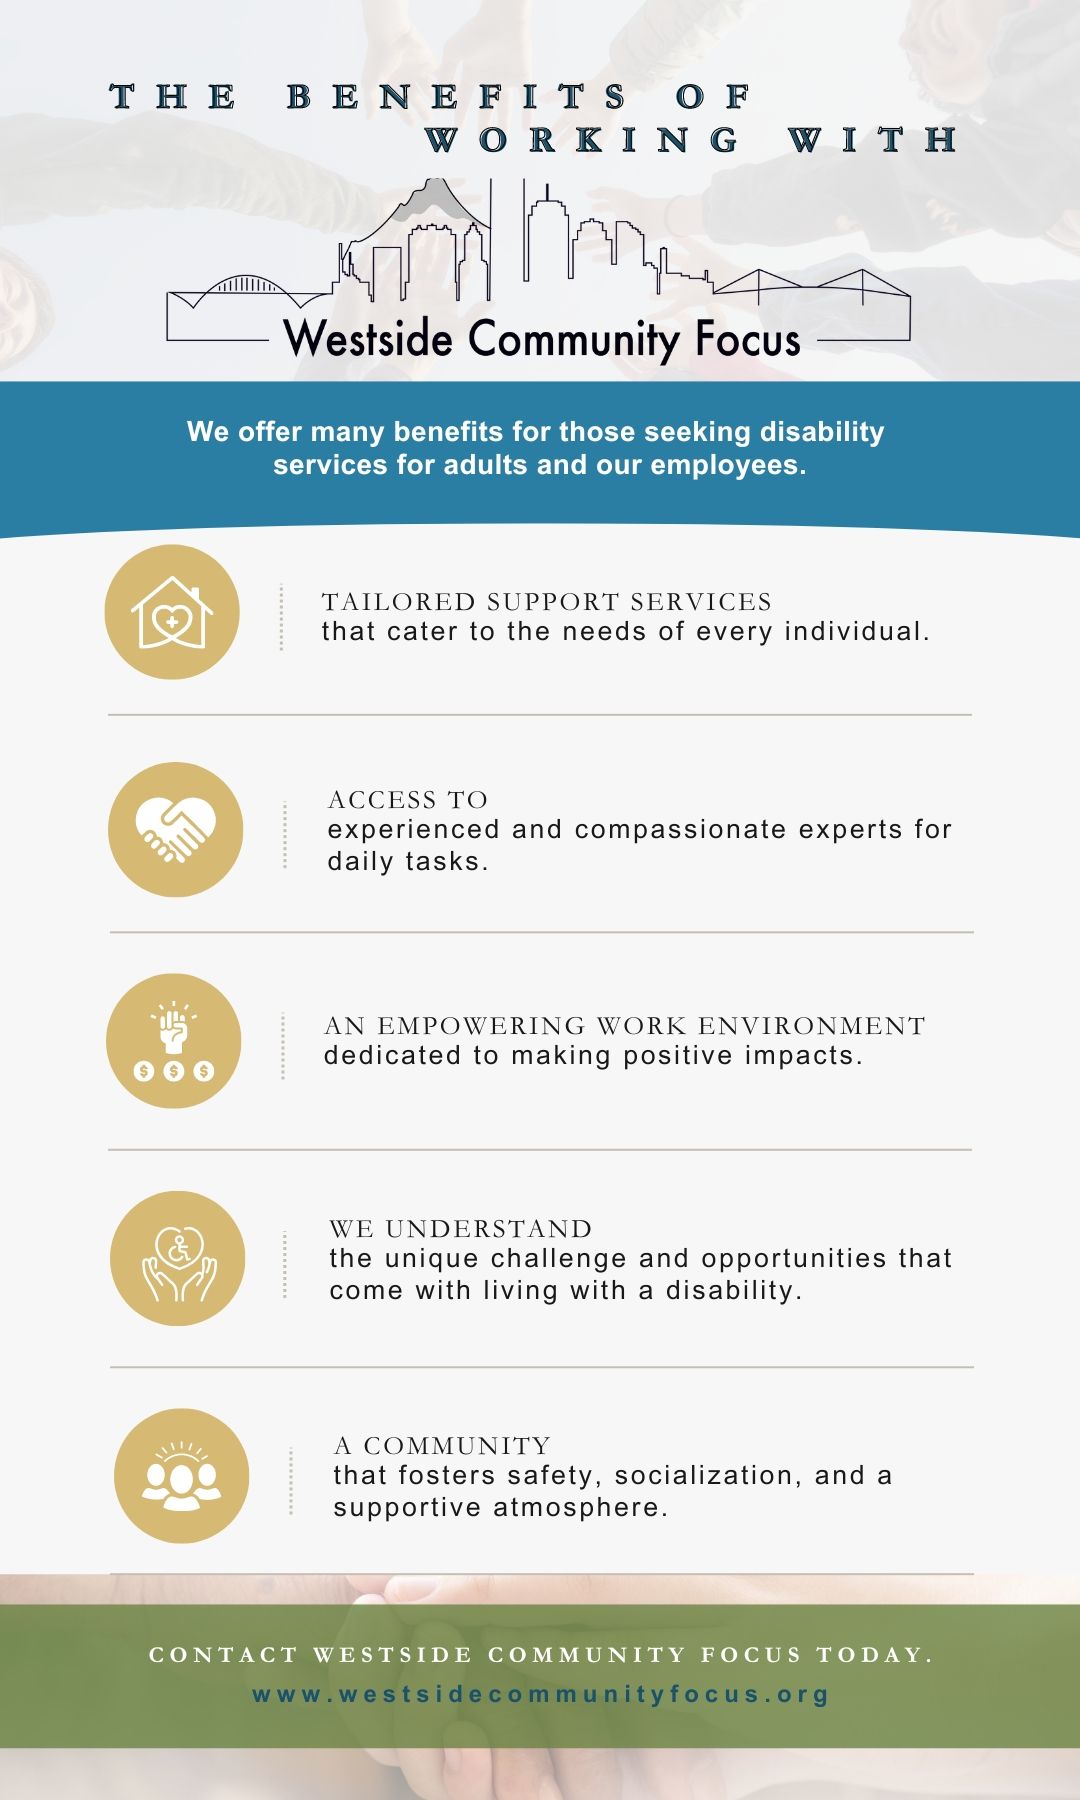 M35903 - Infographic - The Benefits of Working With Westside Community Focus.jpg